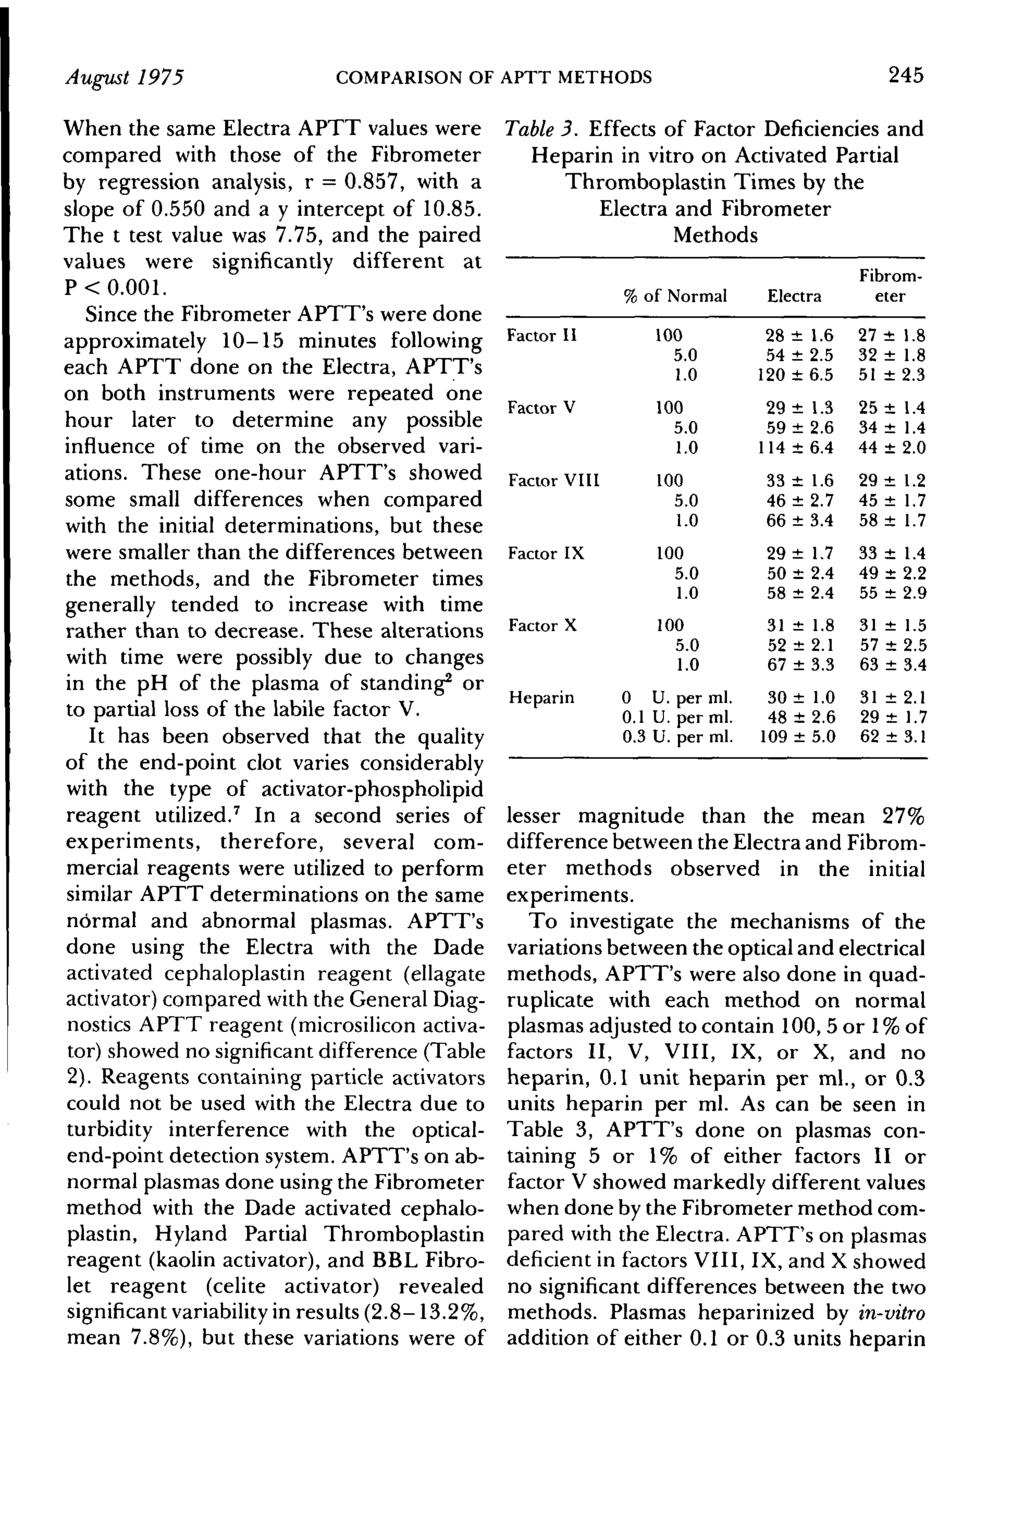 August 1975 COMPARISON OF APTT METHODS 245 When the same Electra APTT values were compared with those of the Fibrometer by regression analysis, r = 0.857, with a slope of 0.